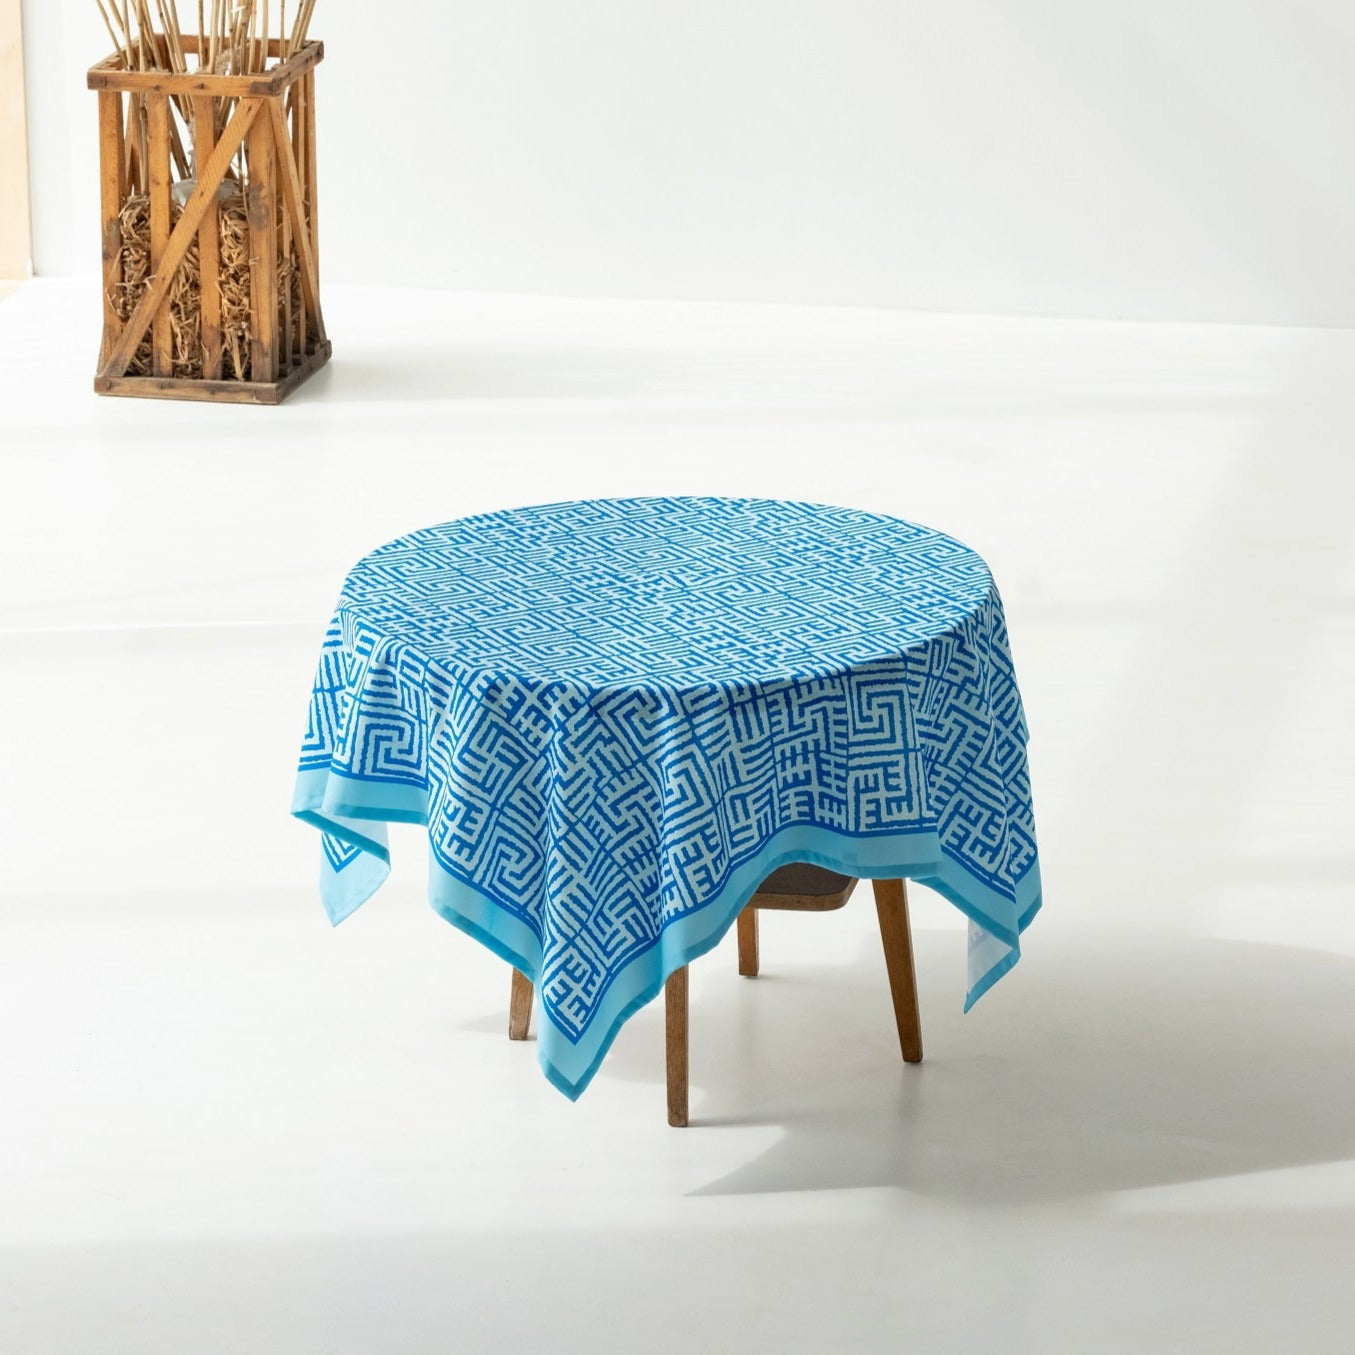 Tablecloth made of recycled fabric Rasti river 117B